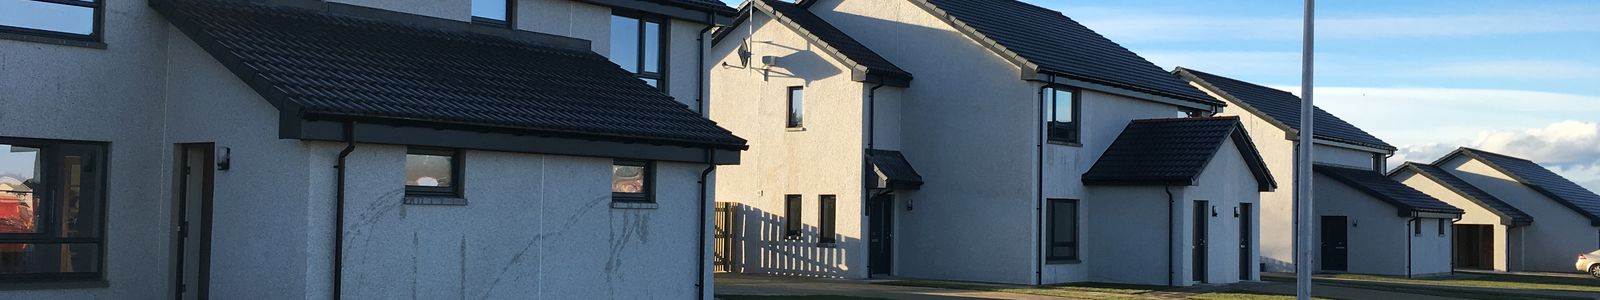 Affordable Housing, Lochloy, Nairn, Phase 5